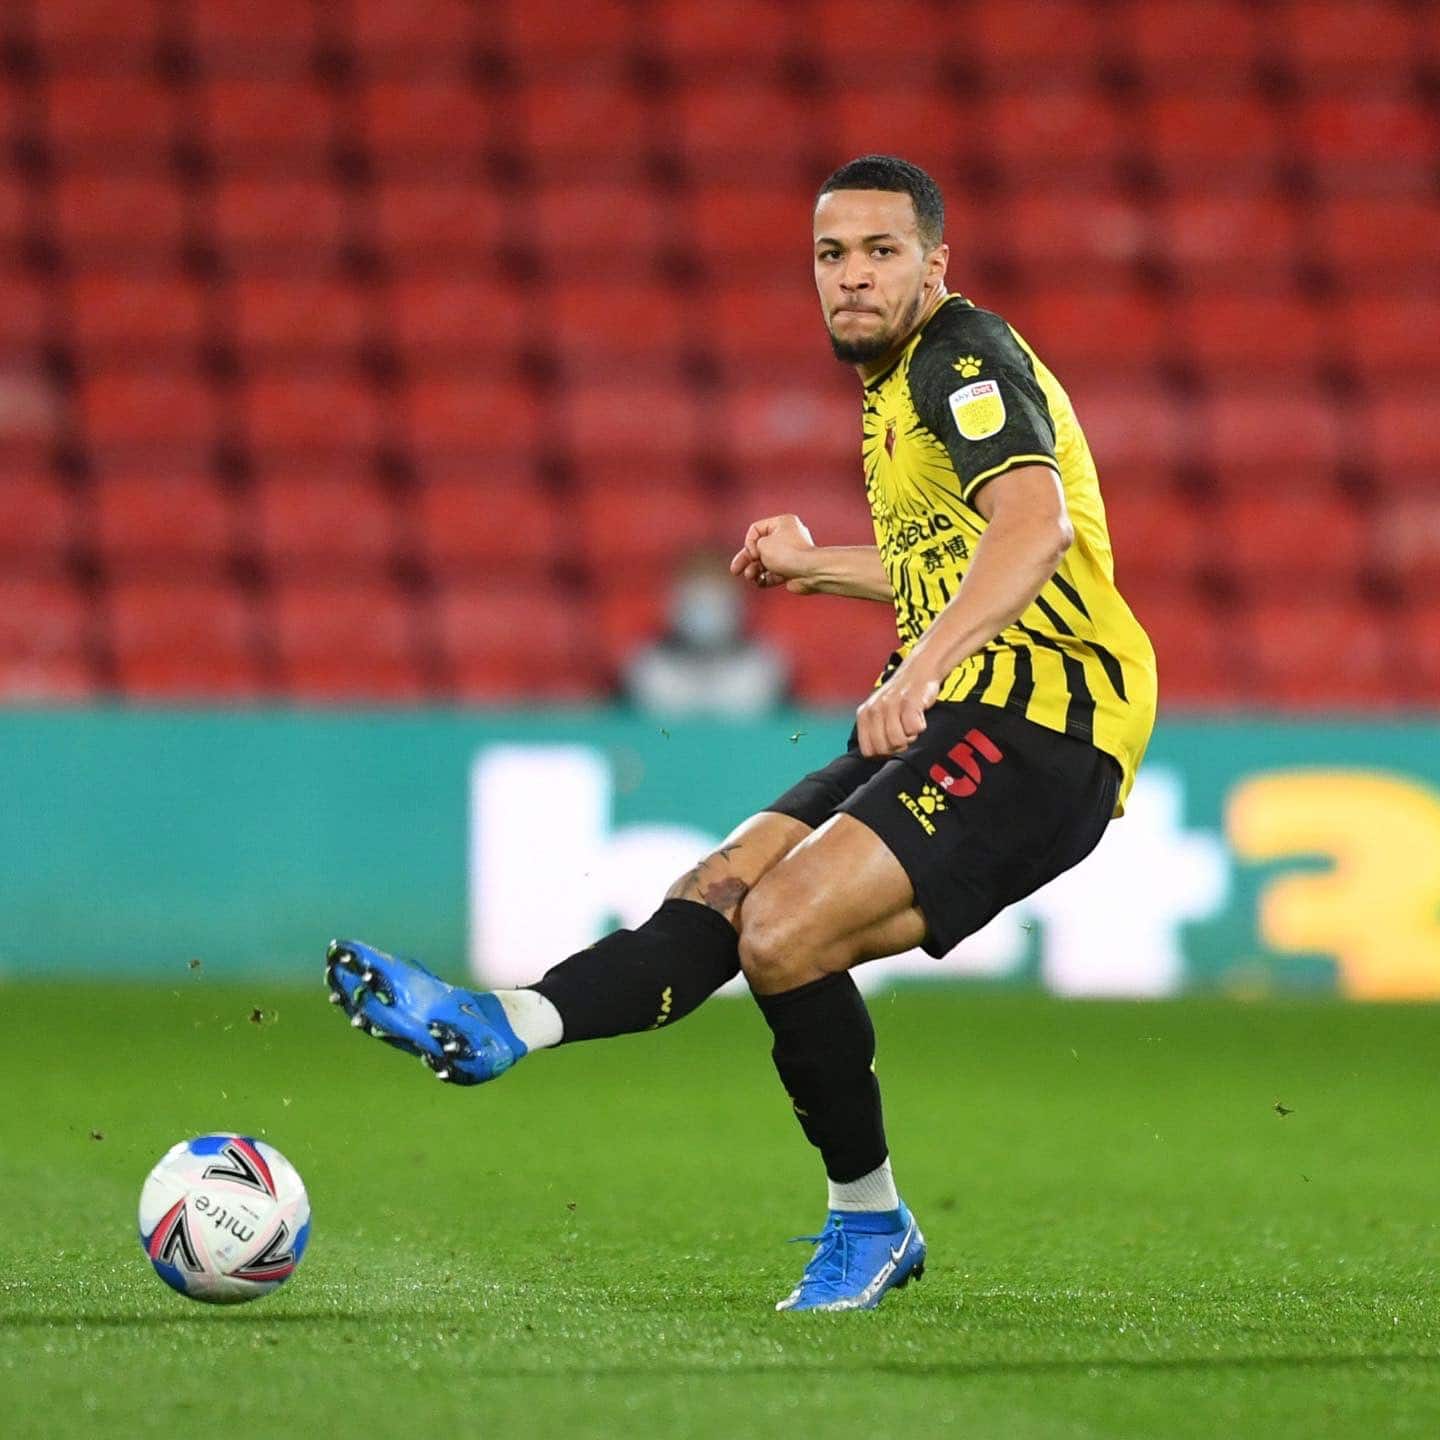 Premier League Promotion Primary Target For Watford –